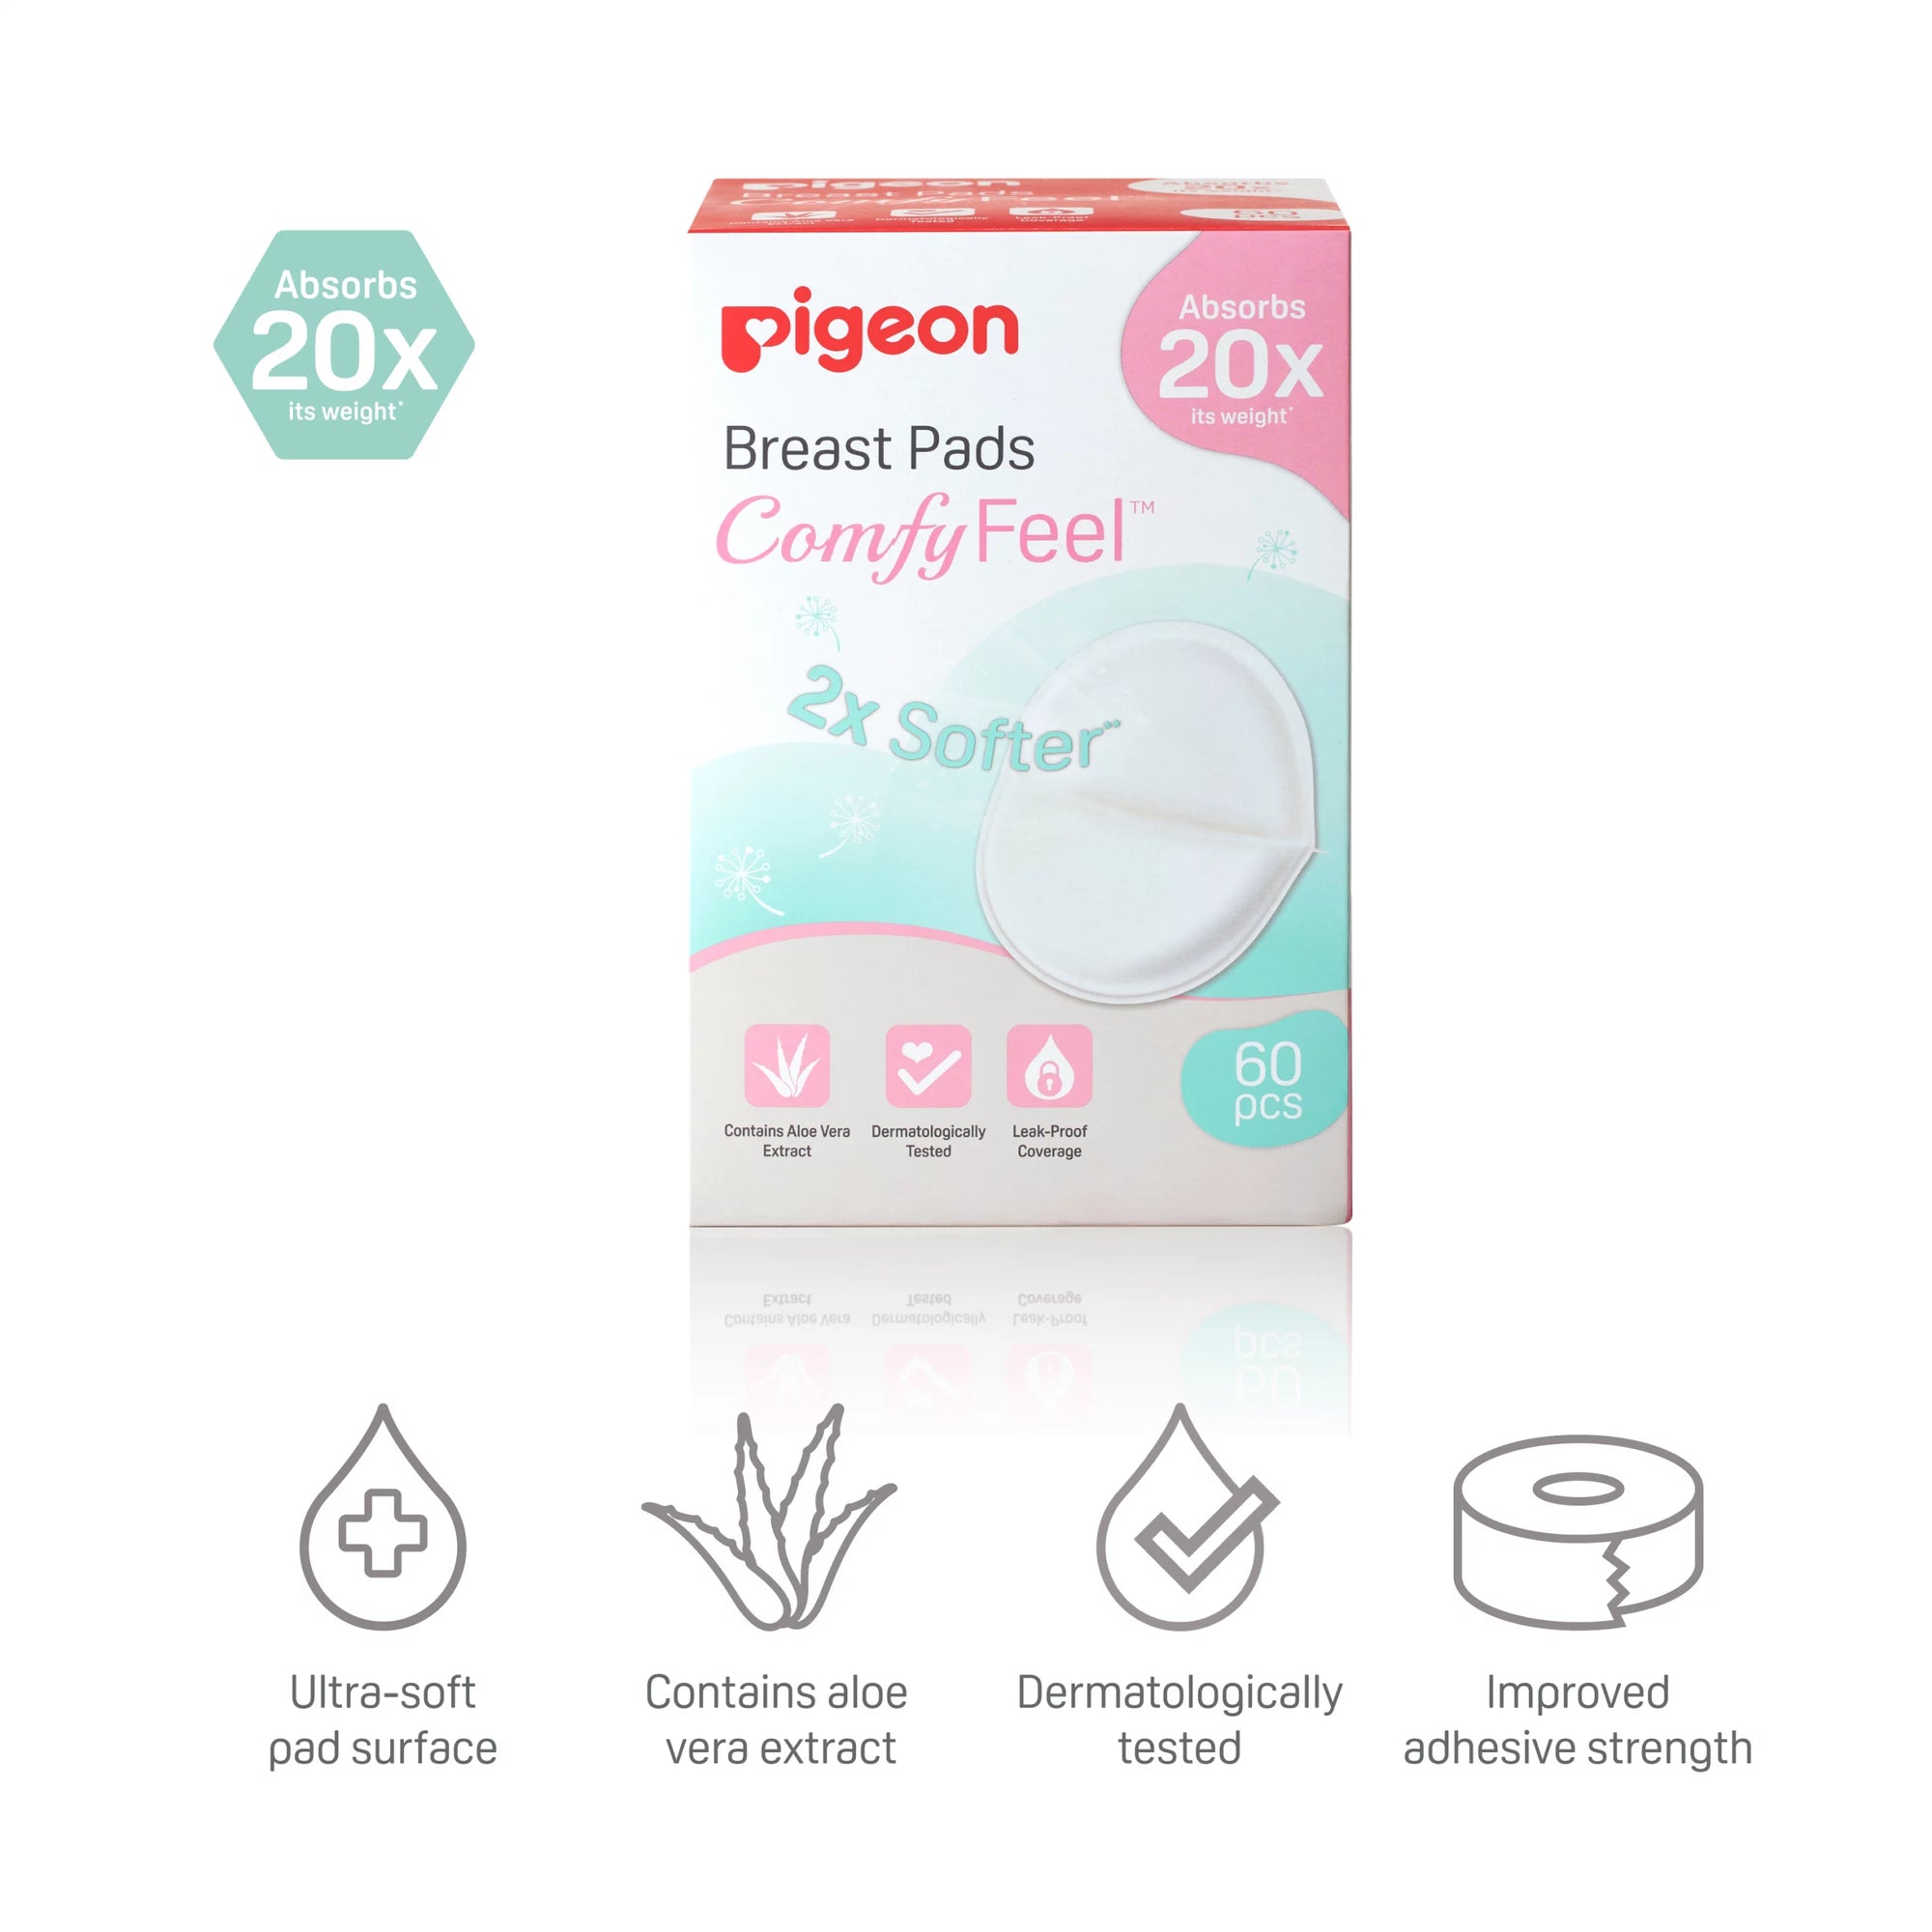 Pigeon Comfy Feel Disposable Breast Pads 60 Pcs